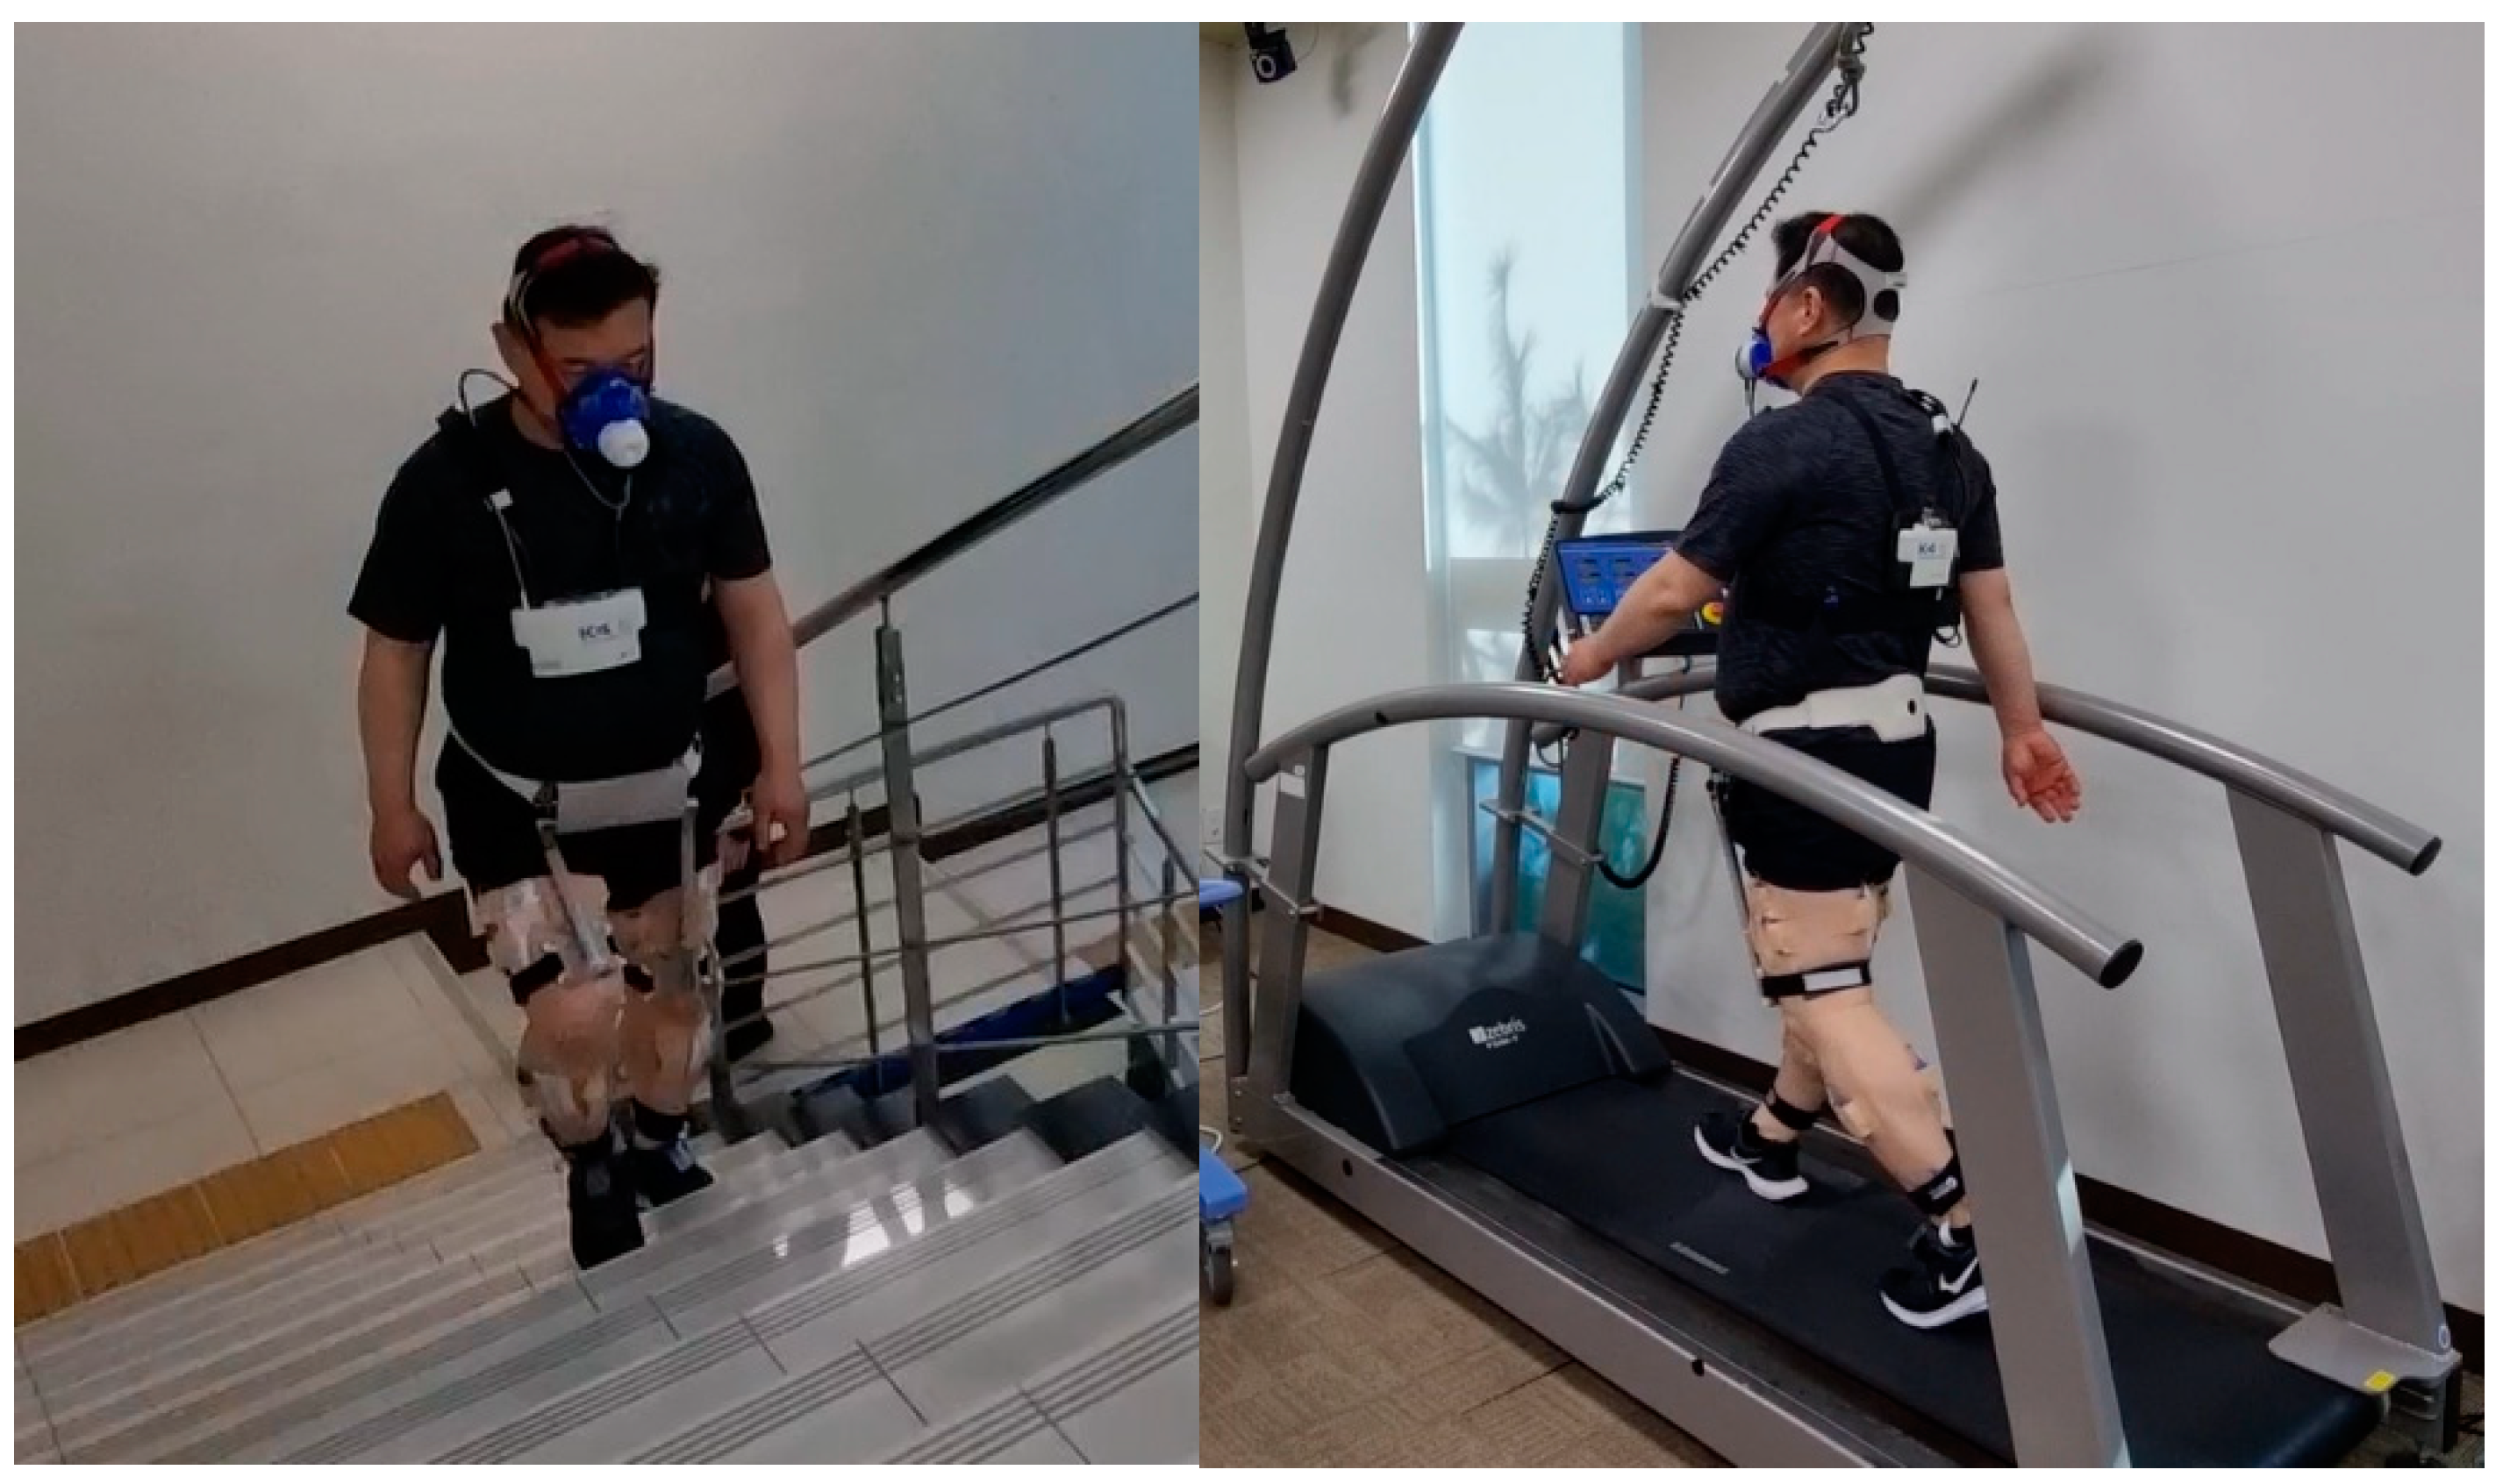 Exercise with a wearable hip-assist robot improved physical